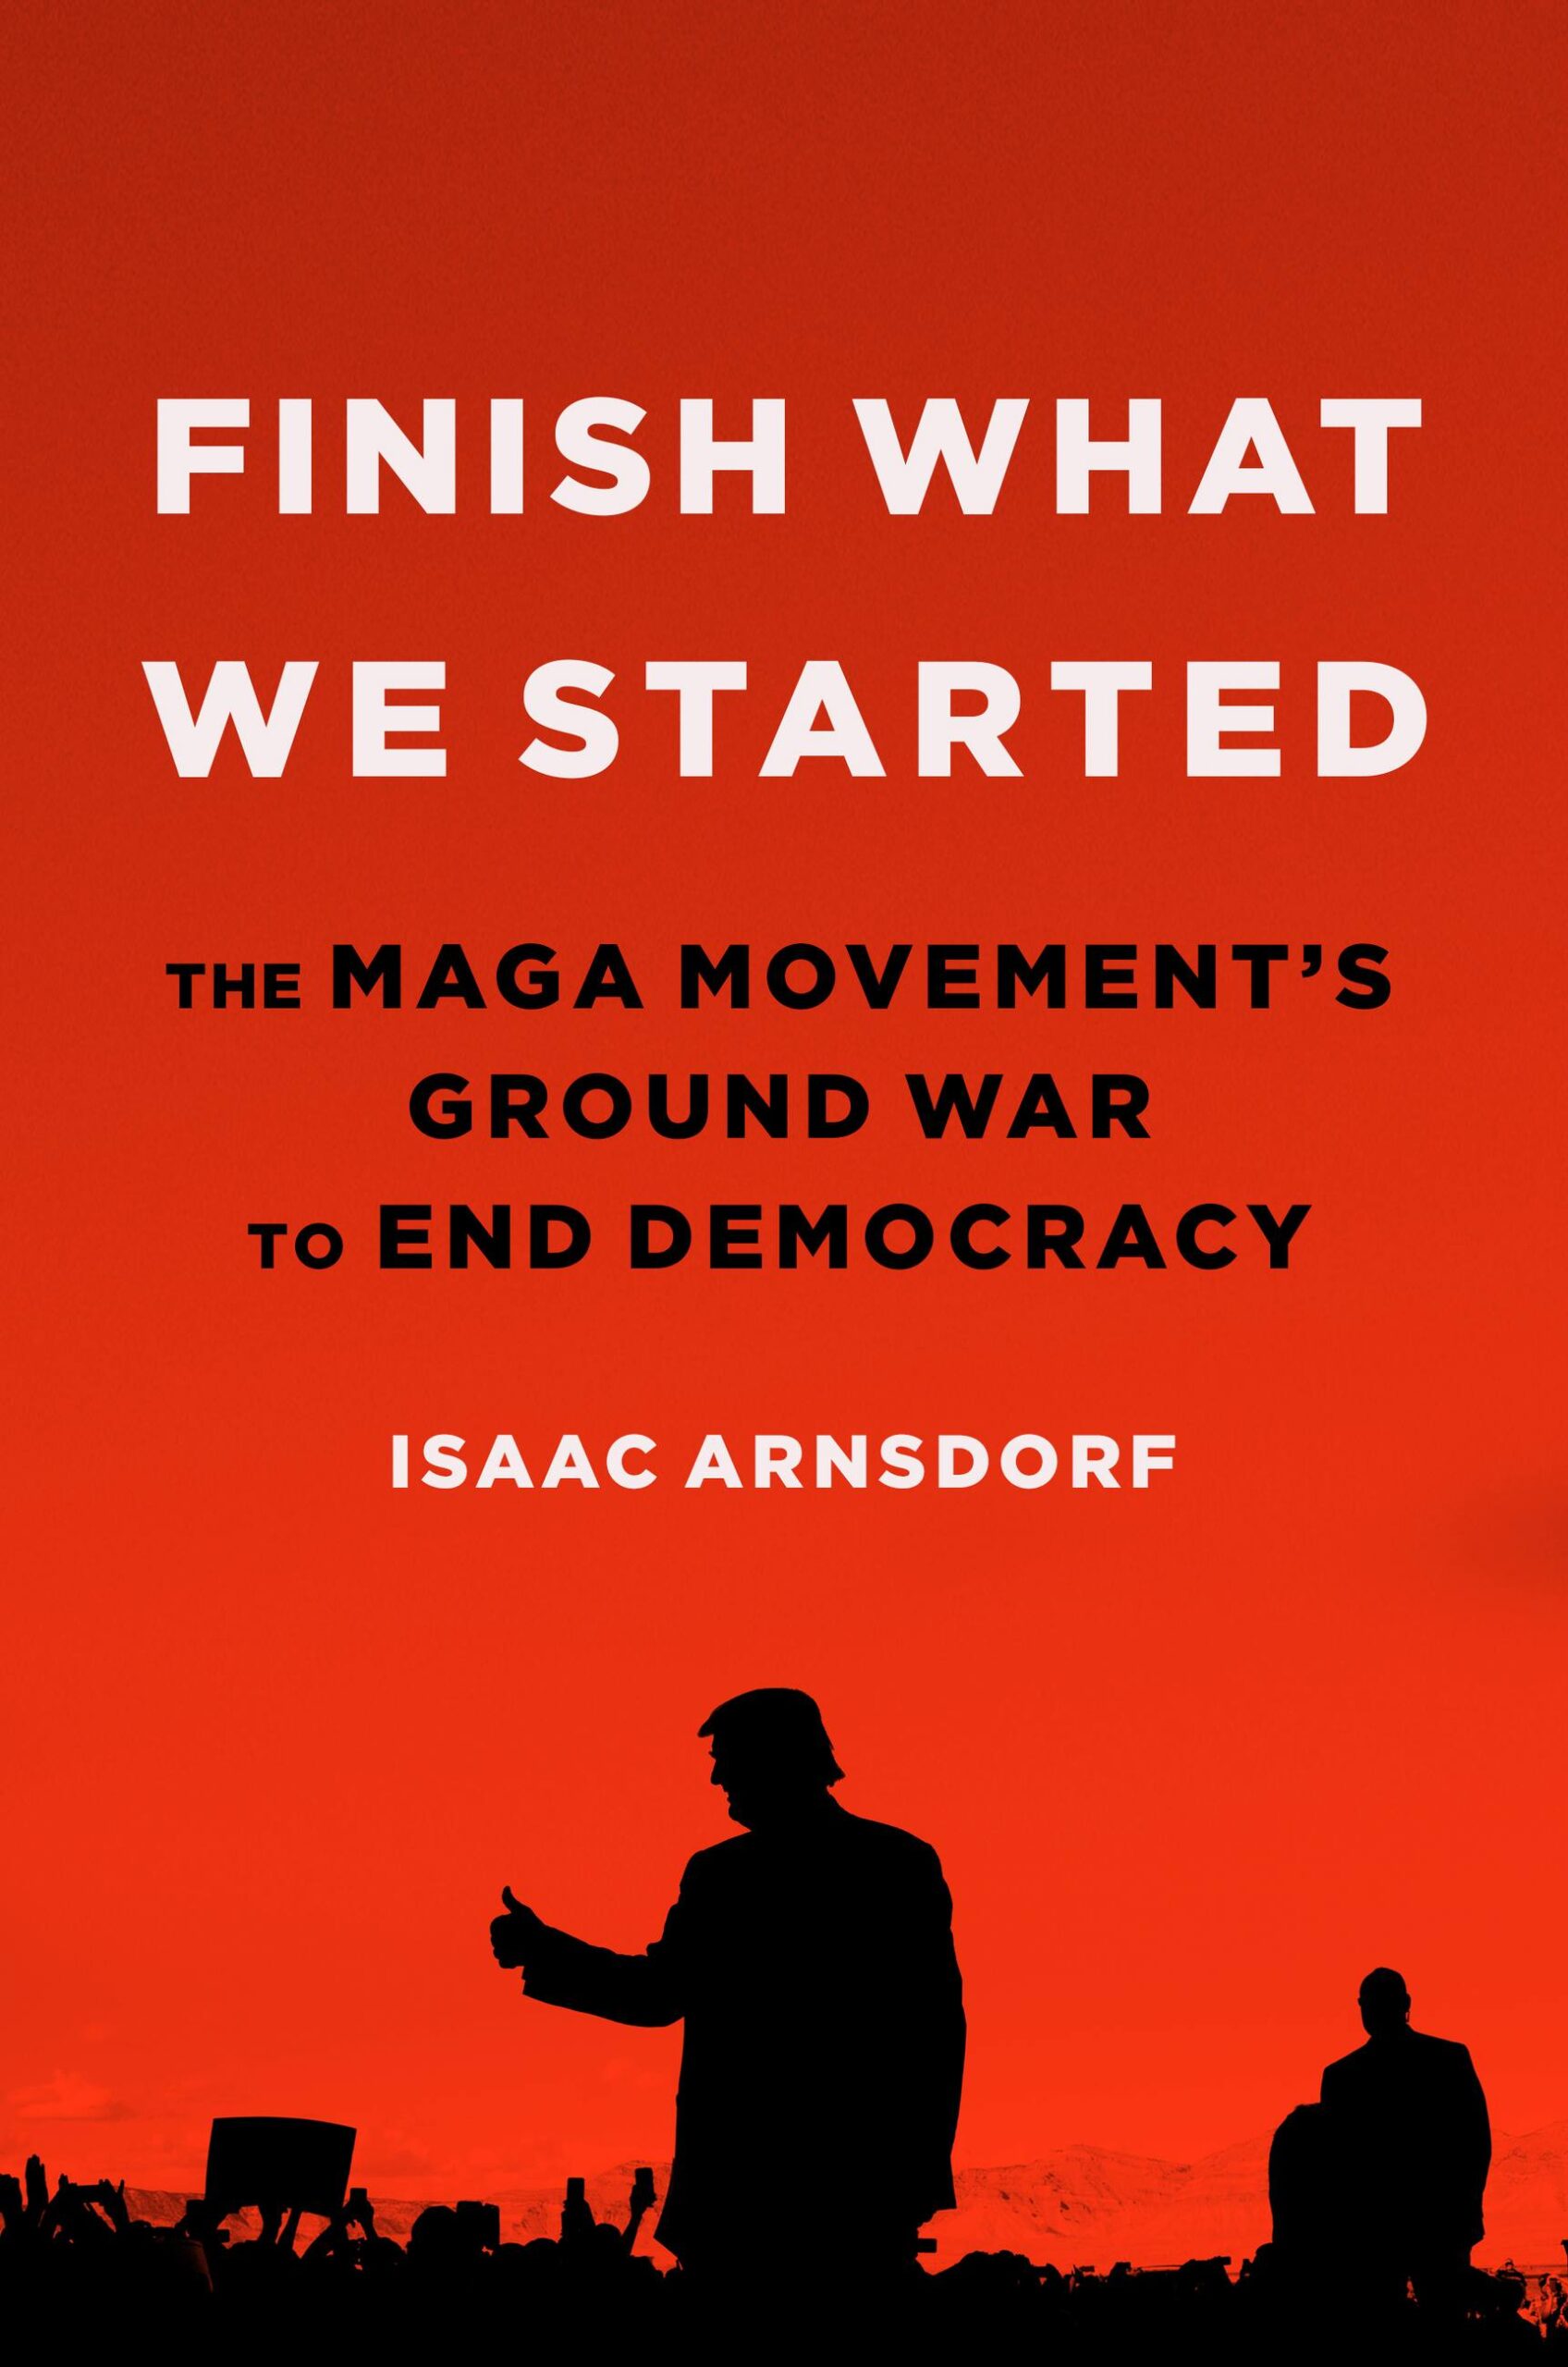 Book Launch: Finish What We Started by Isaac Arnsdorf in Conv. w/ Zoe Chase